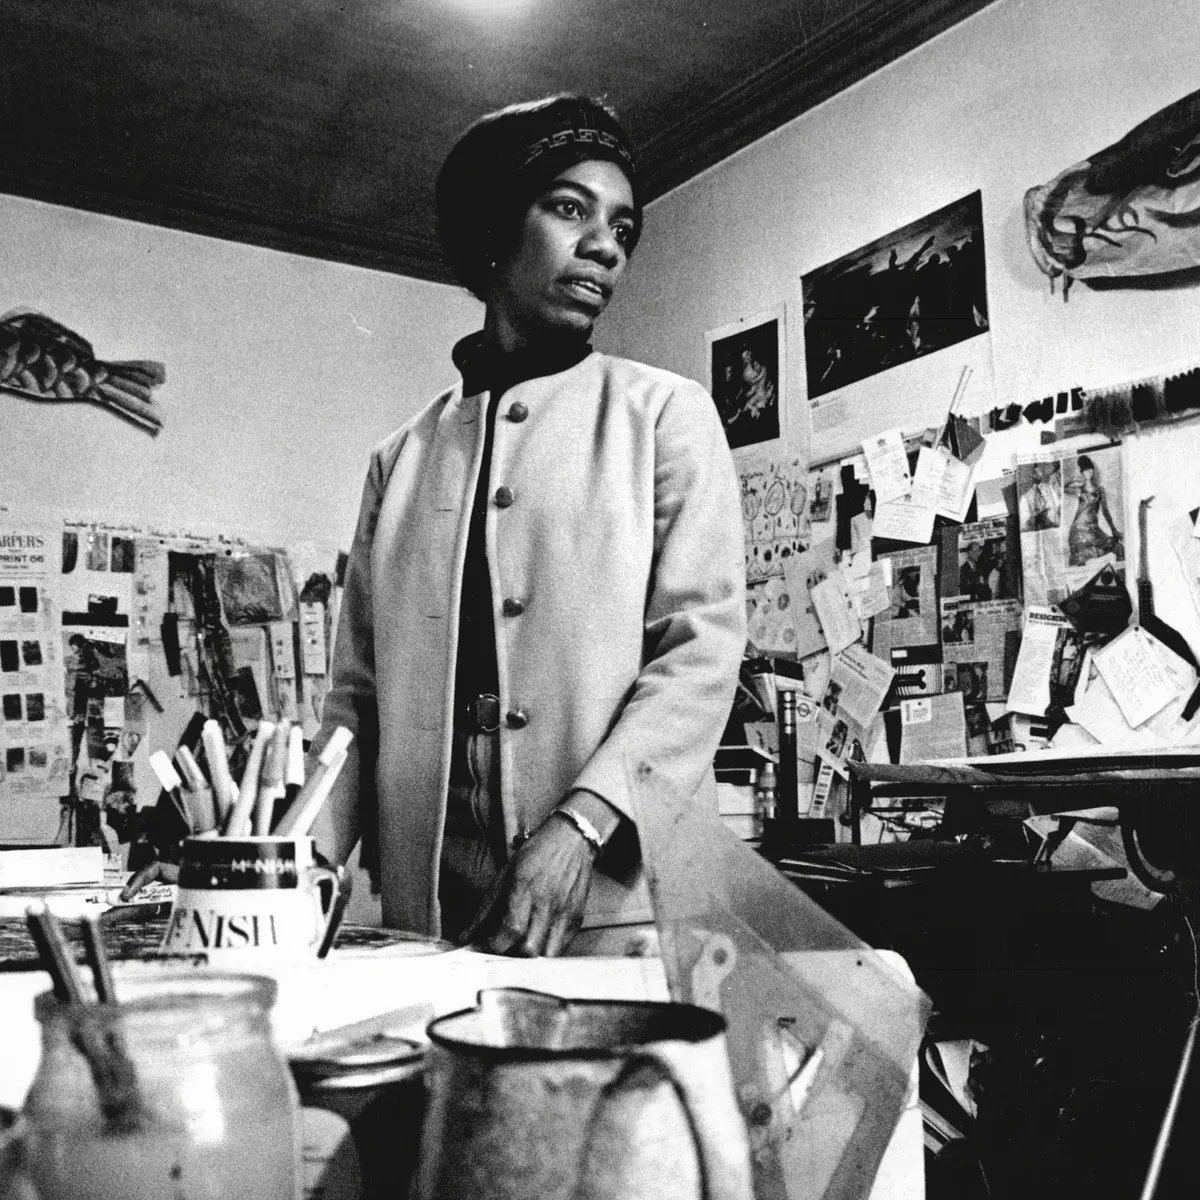 Althea McNish | 7. One of the most impressive aspects of Althea McNish's success as an influential textile designer is that she achieved it on her own terms and used her work to explore her cultural identity as a Black Trinidadian woman in post-war Britain instagram.com/p/C7I6iWHIUSh/